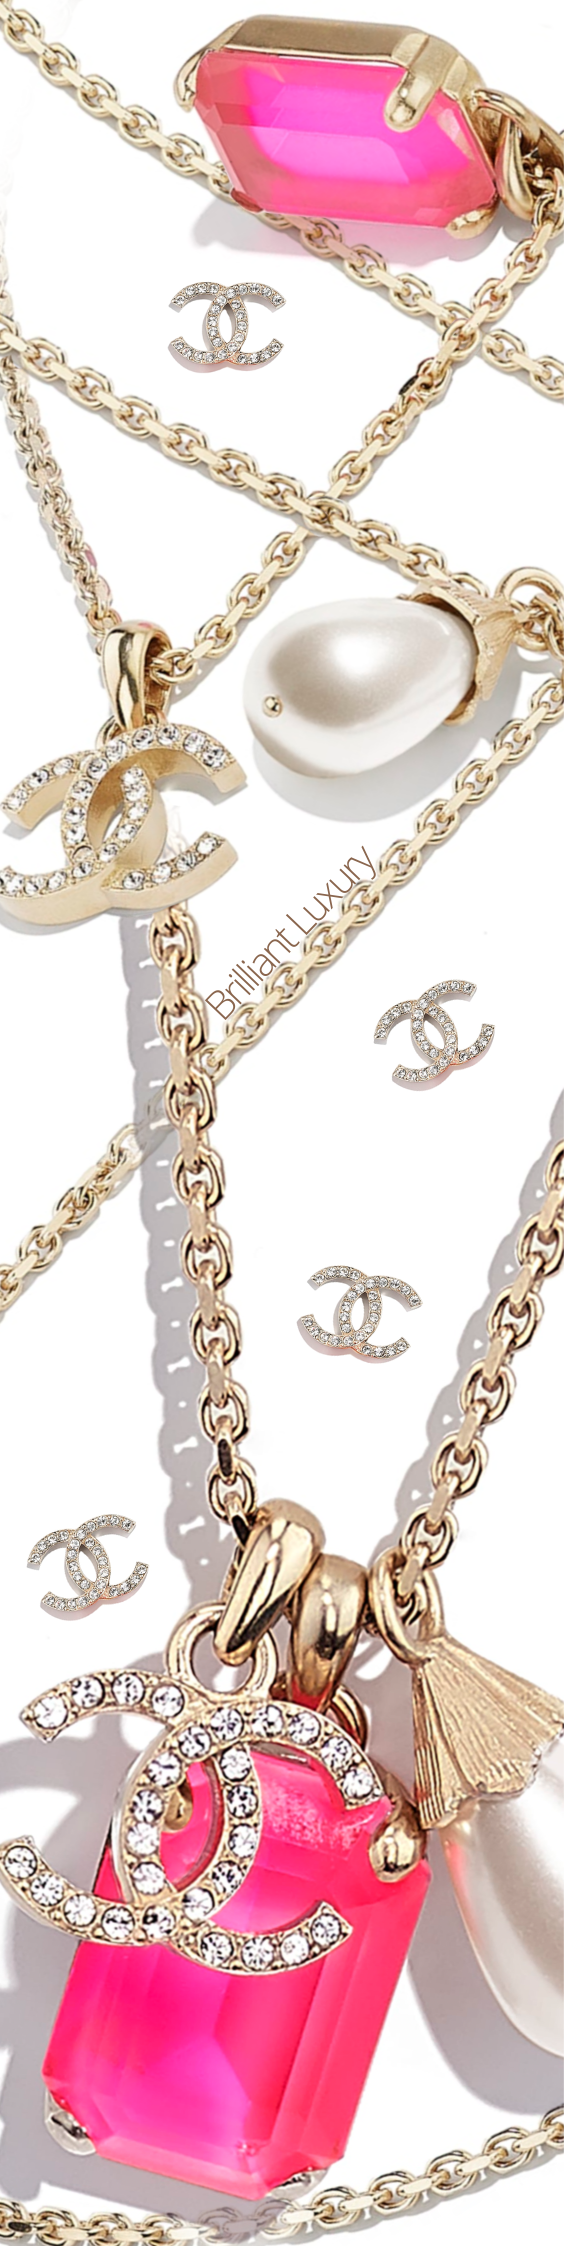 ♦Chanel necklace gold pink pearly white metal glass pearls #chanel #jewelry #pink #brilliantluxury